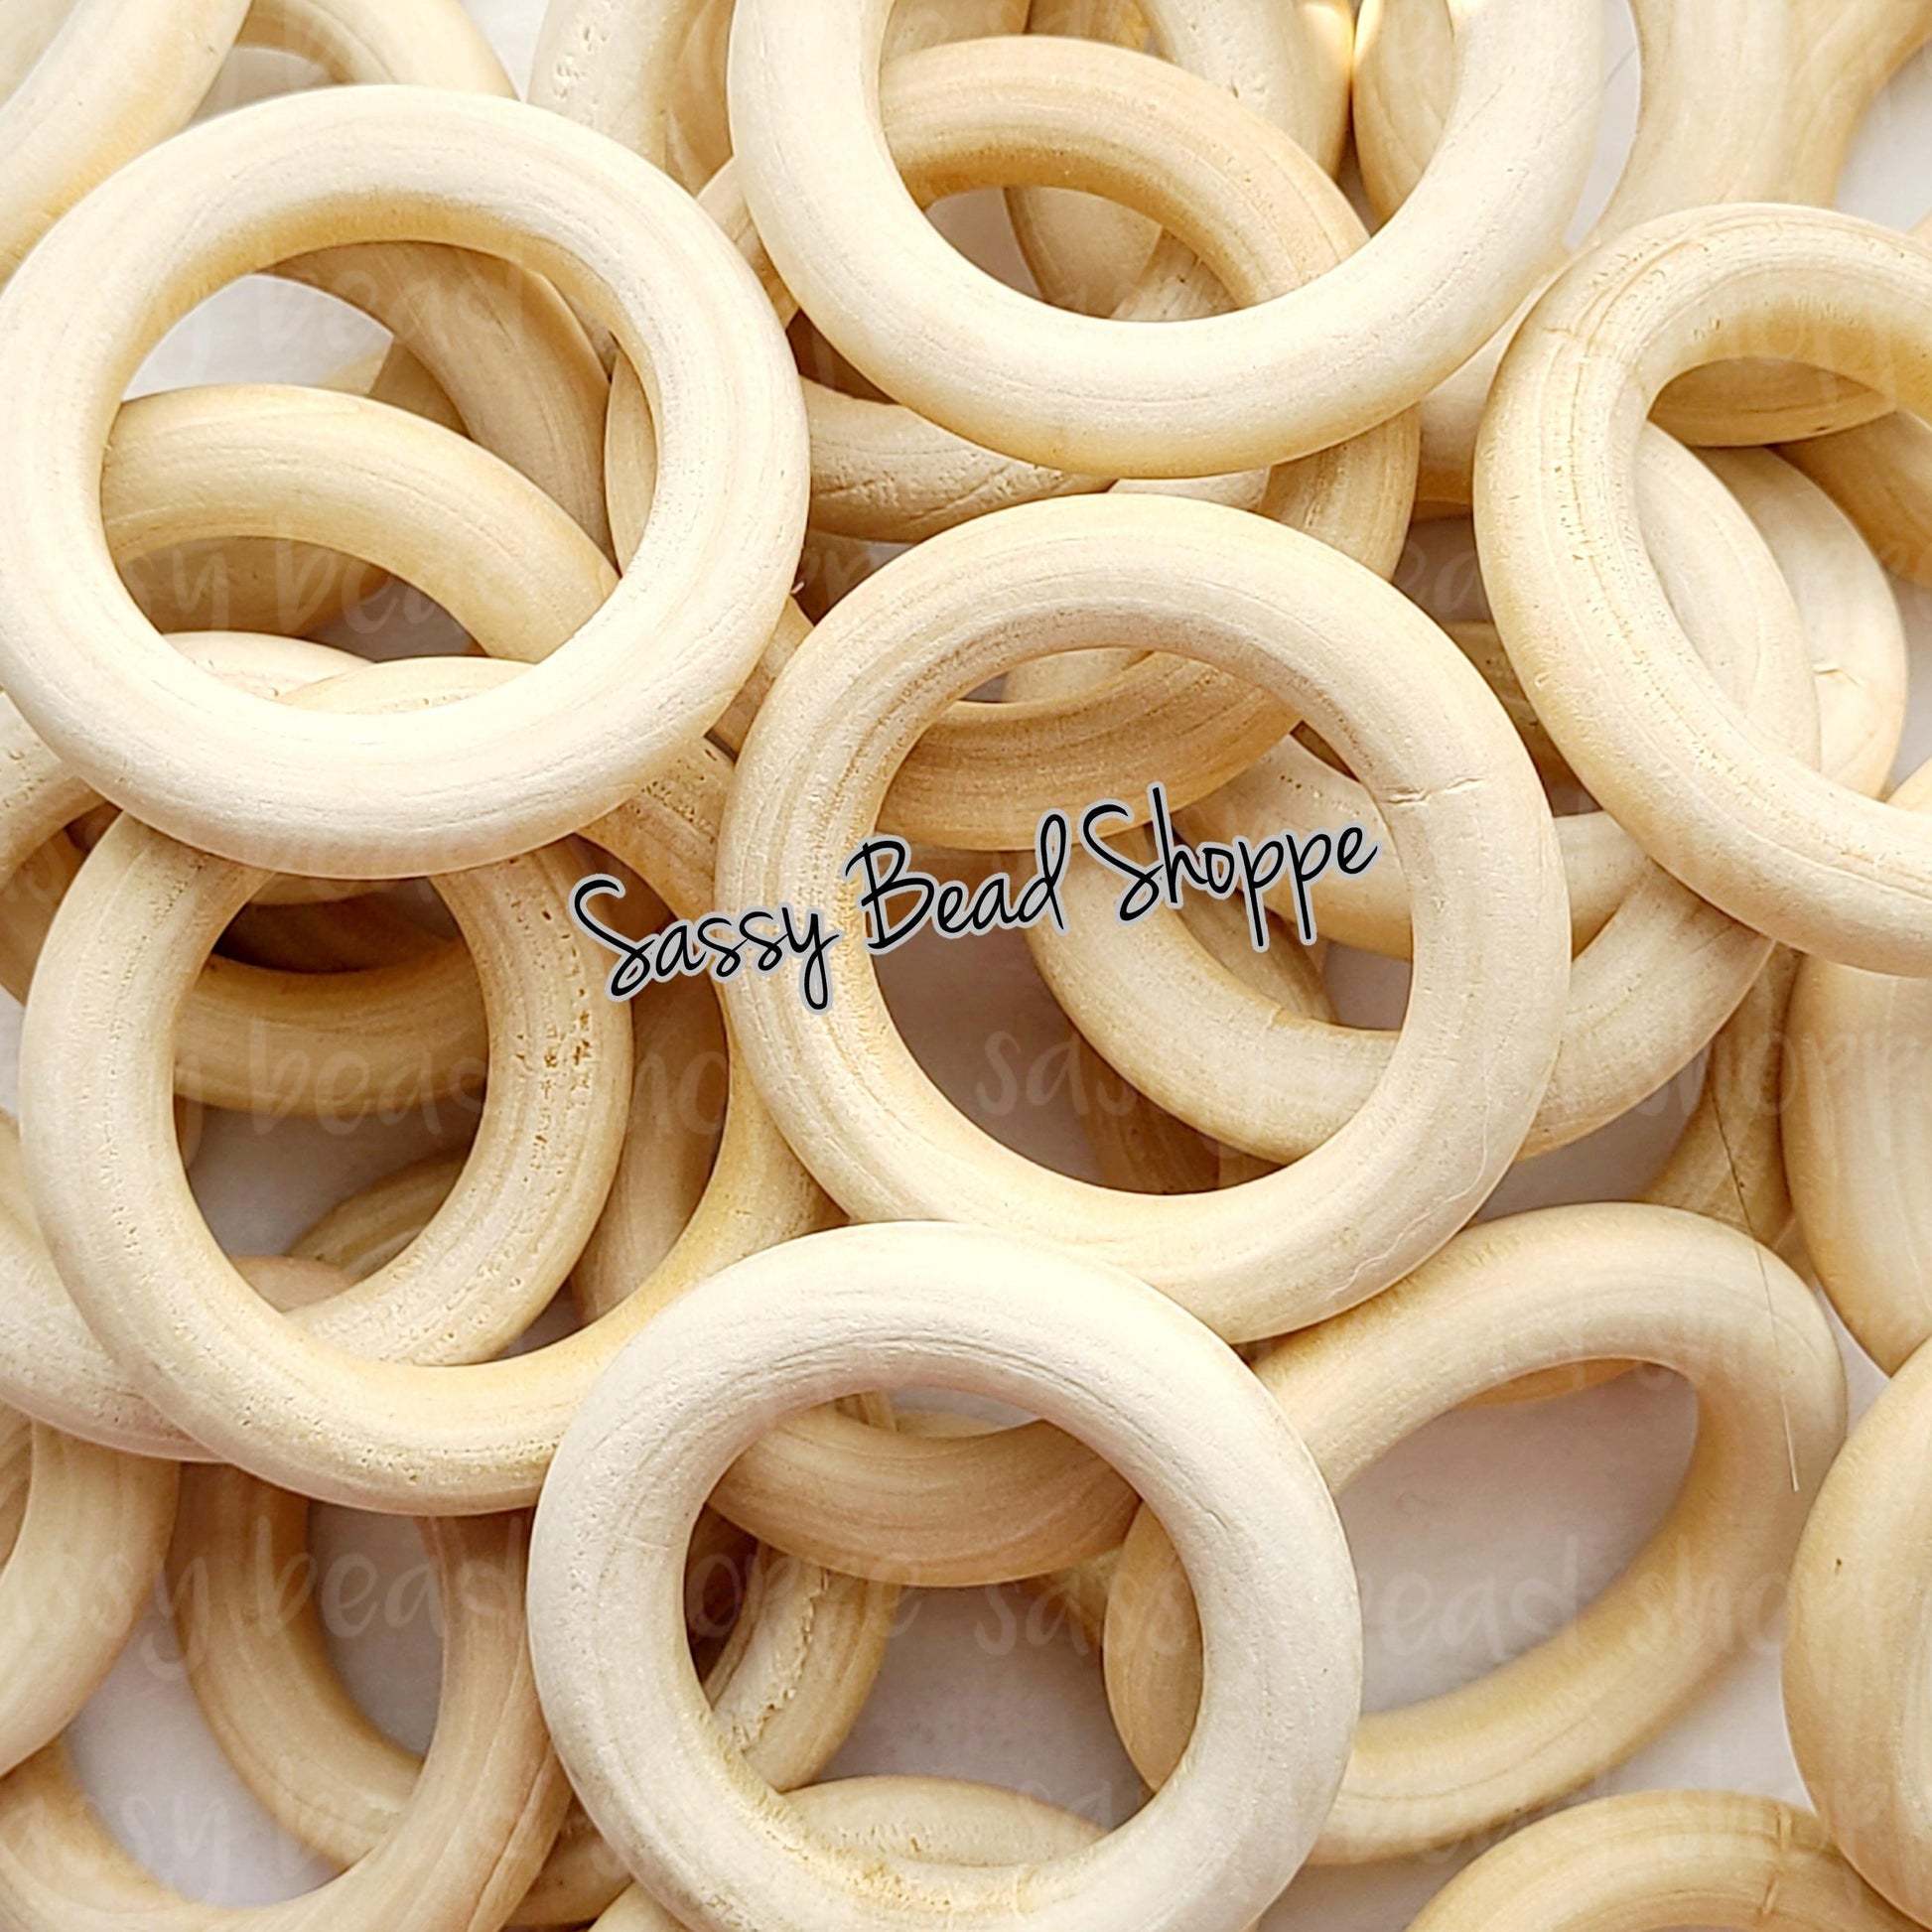 Natural Wood Ring 55mm 3 Count - Sassy Bead Shoppe